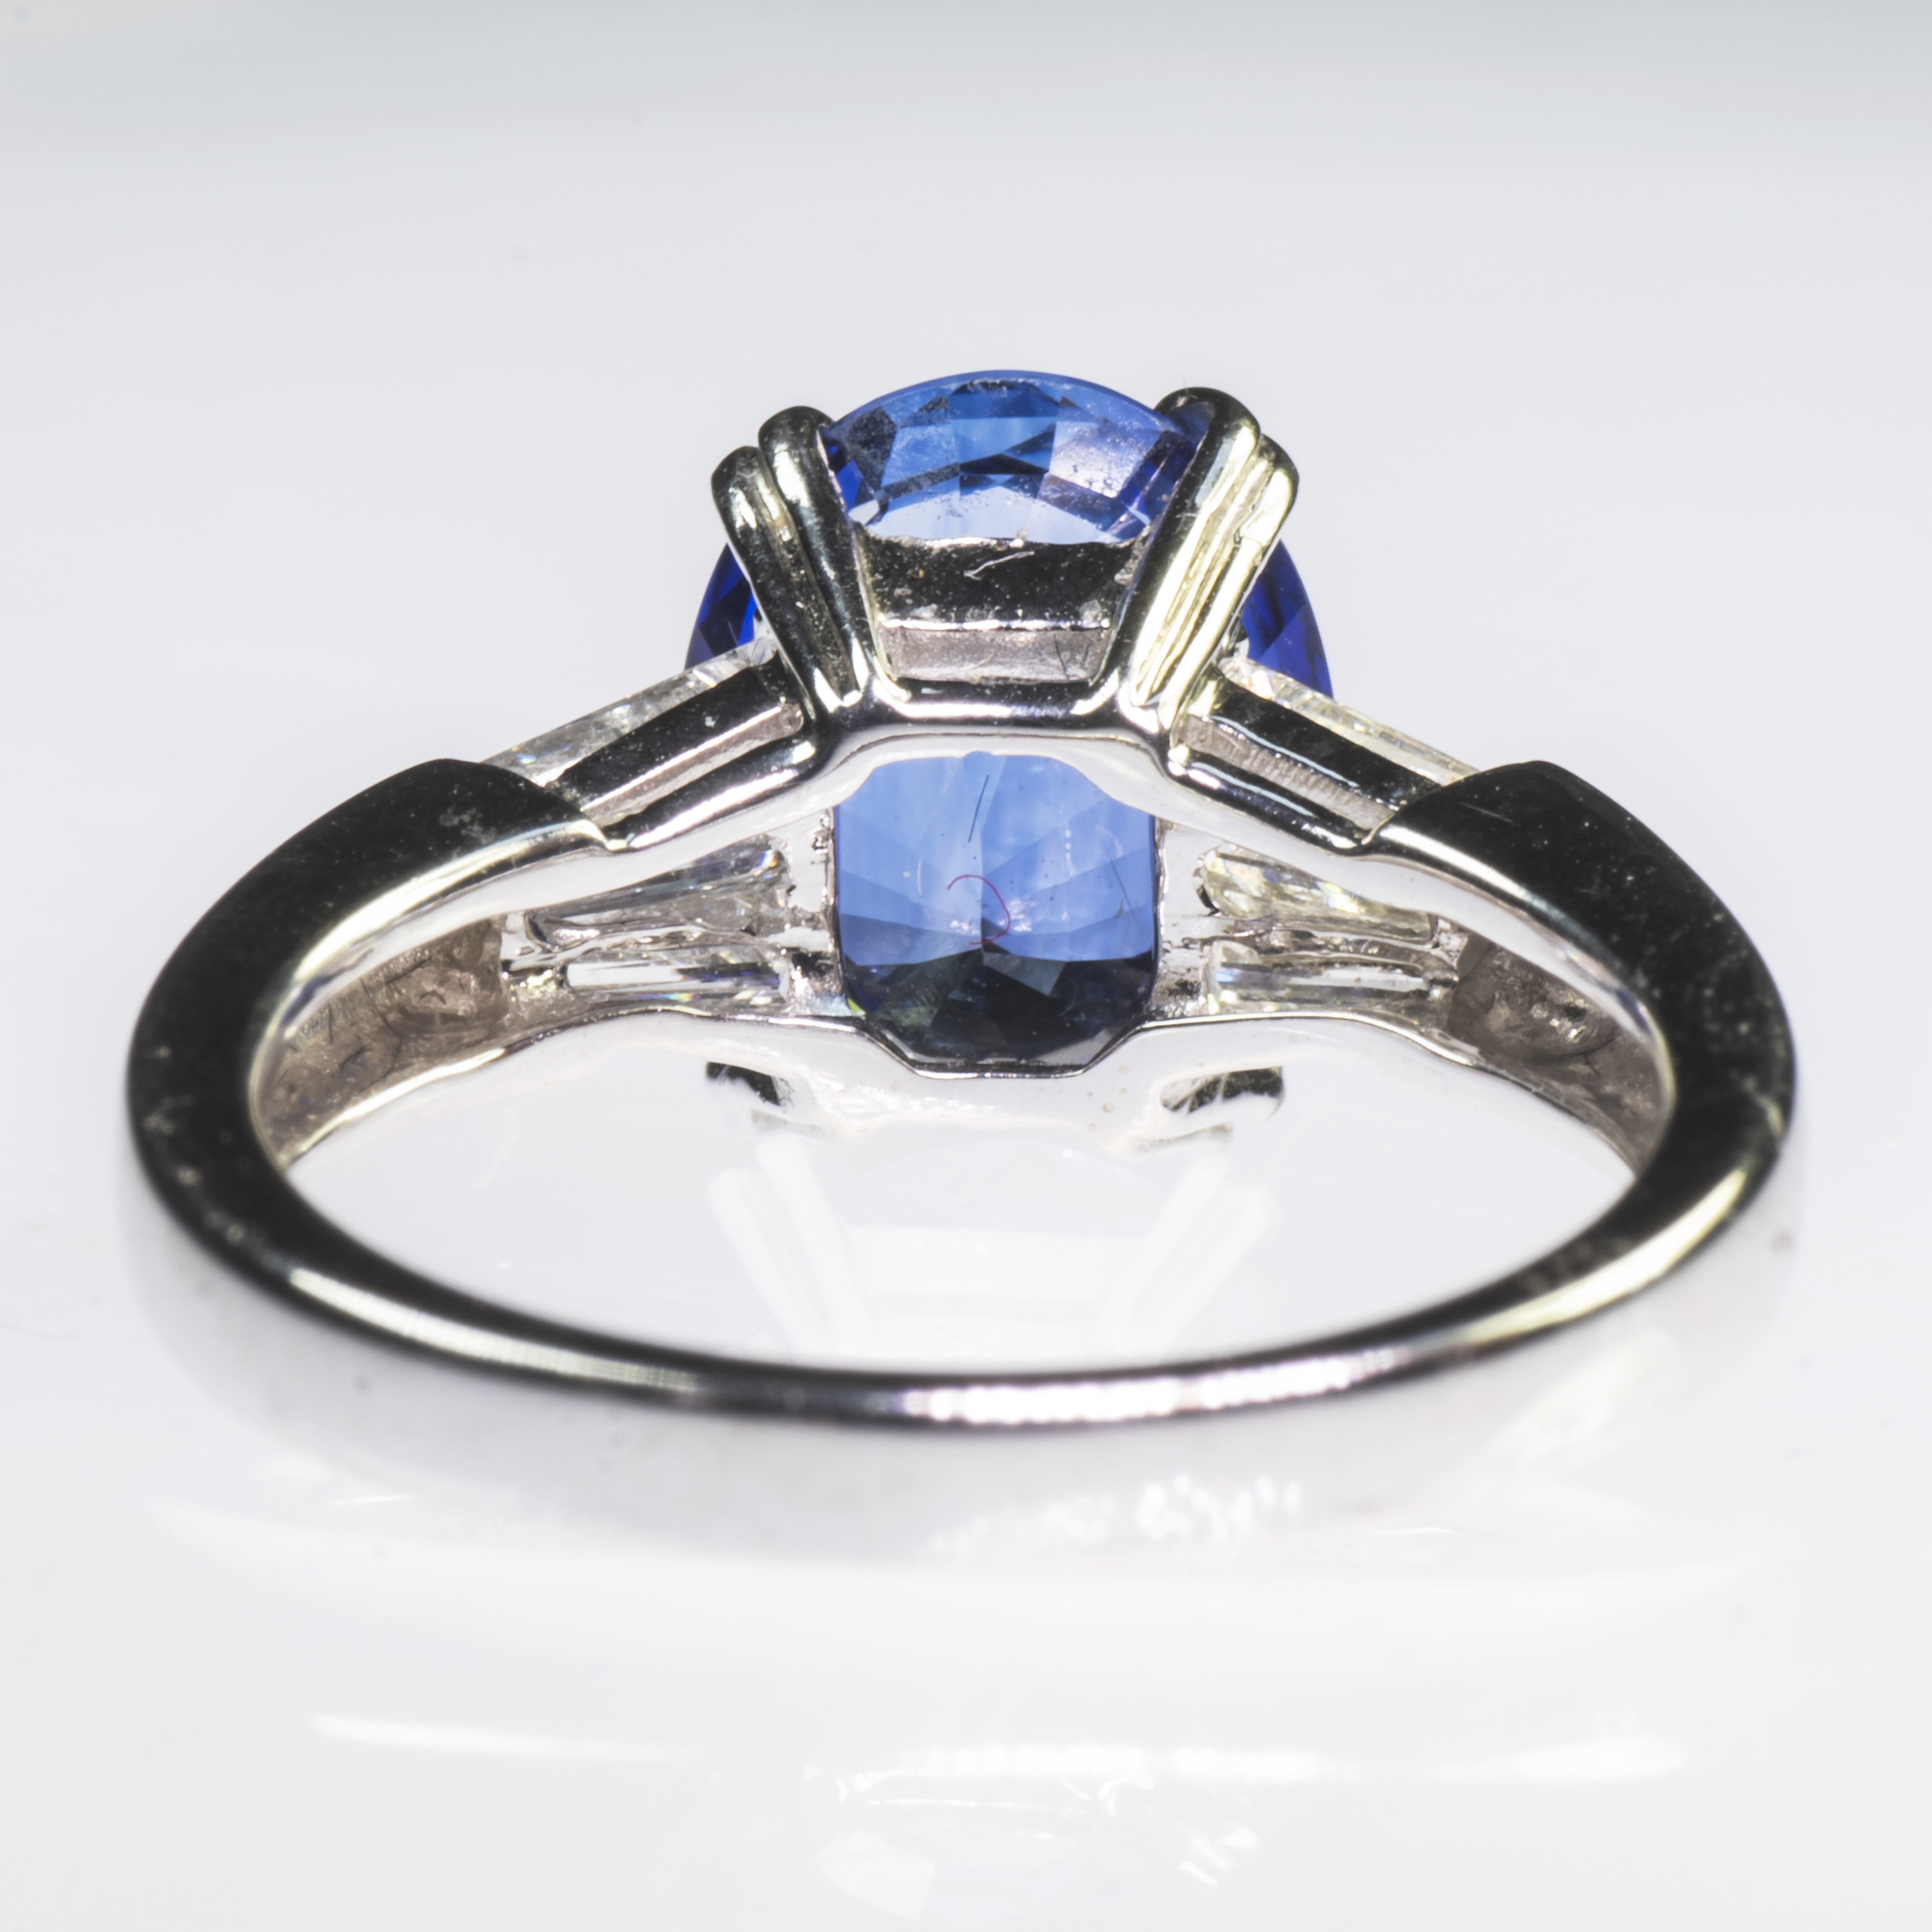 AN OVAL CUT FOUR CARAT SAPPHIRE AND BAGUETTE CUT DIAMOND RING - Image 3 of 3